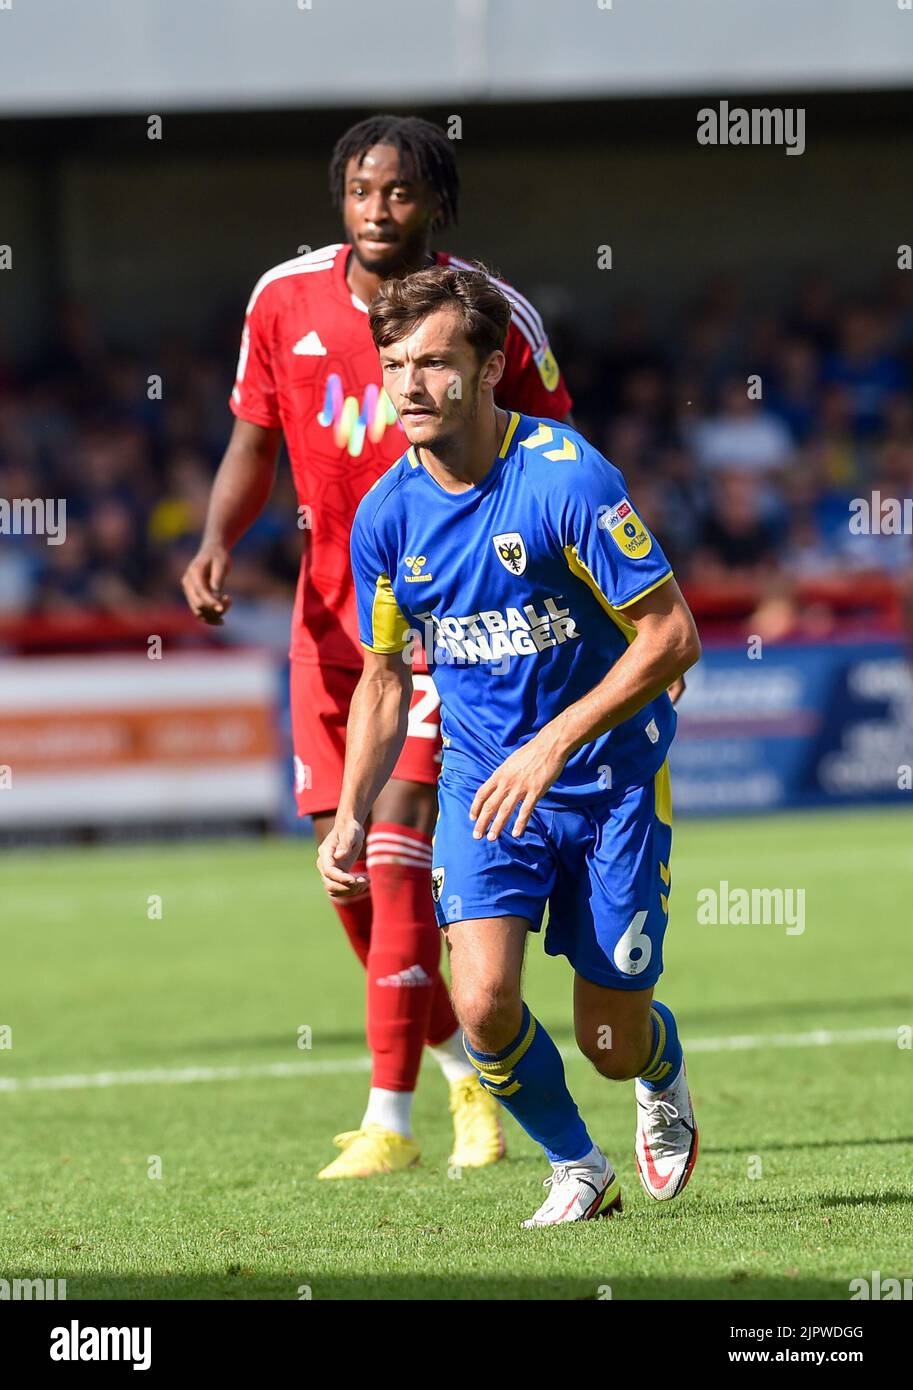 George Marsh of AFC Wimbledon during the EFL League Two match between Crawley Town and AFC Wimbledon at the Broadfield Stadium  , Crawley ,  UK - 20th August 2022 Editorial use only. No merchandising. For Football images FA and Premier League restrictions apply inc. no internet/mobile usage without FAPL license - for details contact Football Dataco Stock Photo